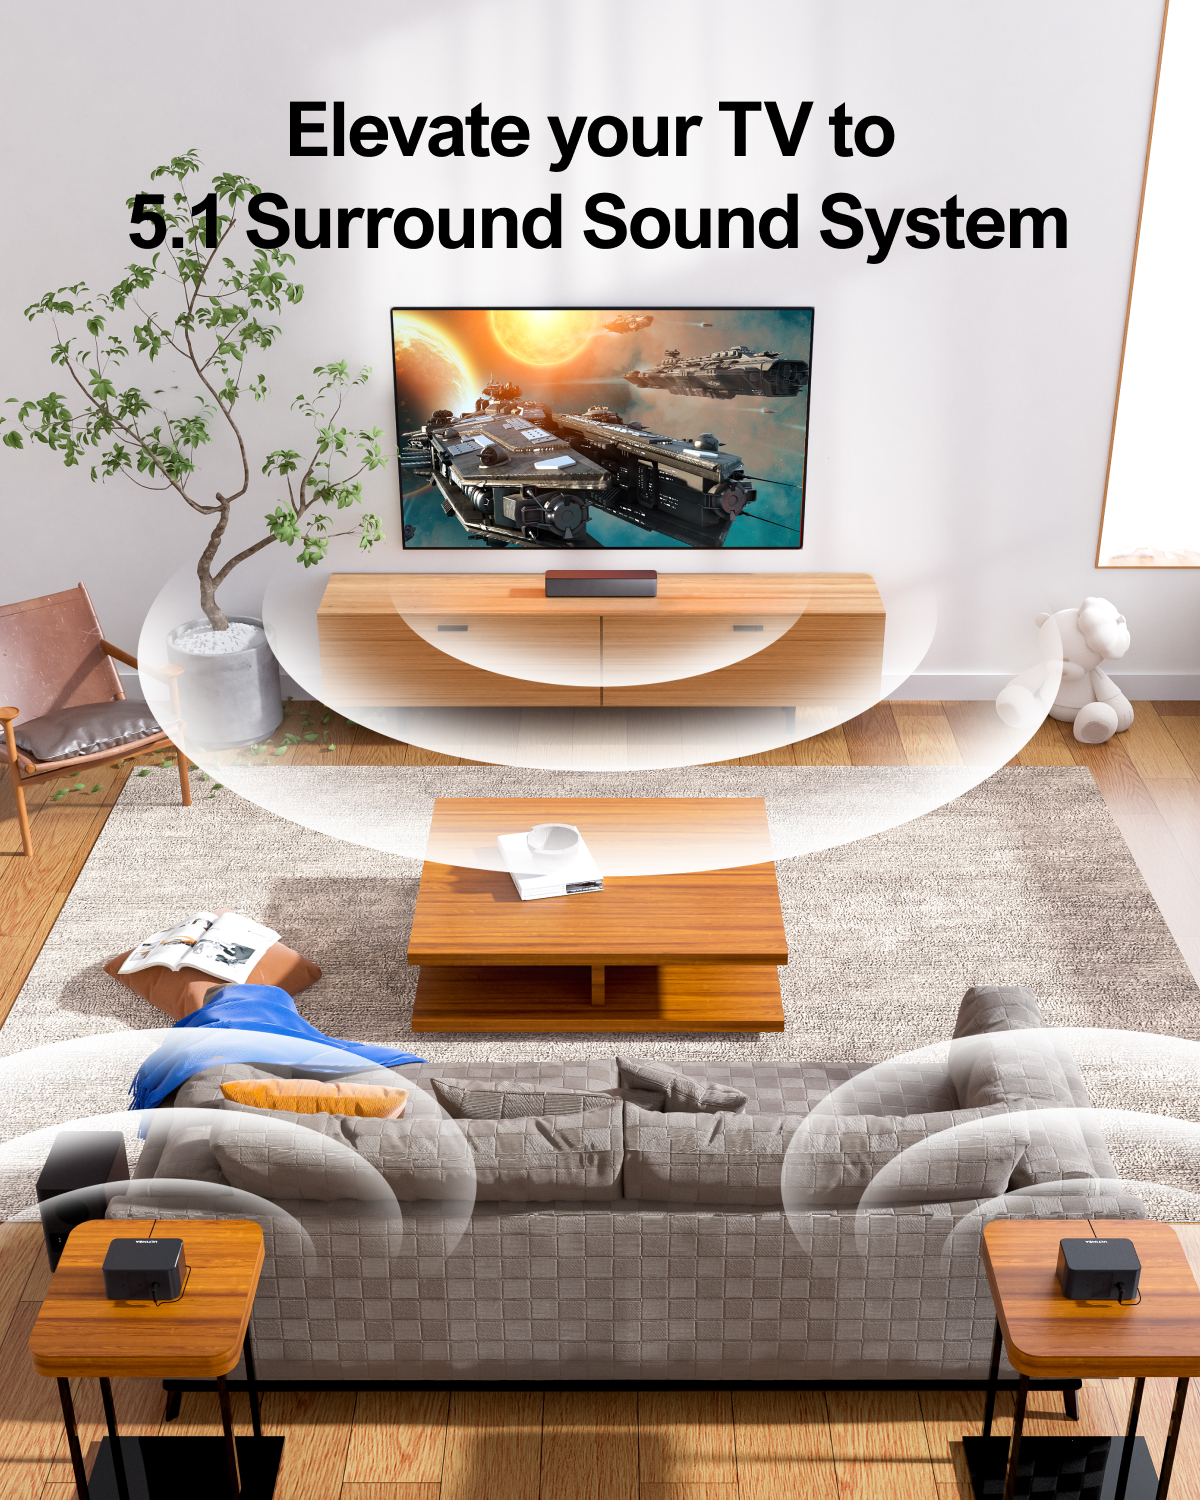 ULTIMEA 5.1 Surround Sound Bar, 3D Surround Sound System, 320W Sound bar for TV with Wireless Subwoofer and Rear Speakers, Surround and Bass Adjustable Home Theater TV Speakers, Poseidon D50  2024 - image 3 of 9